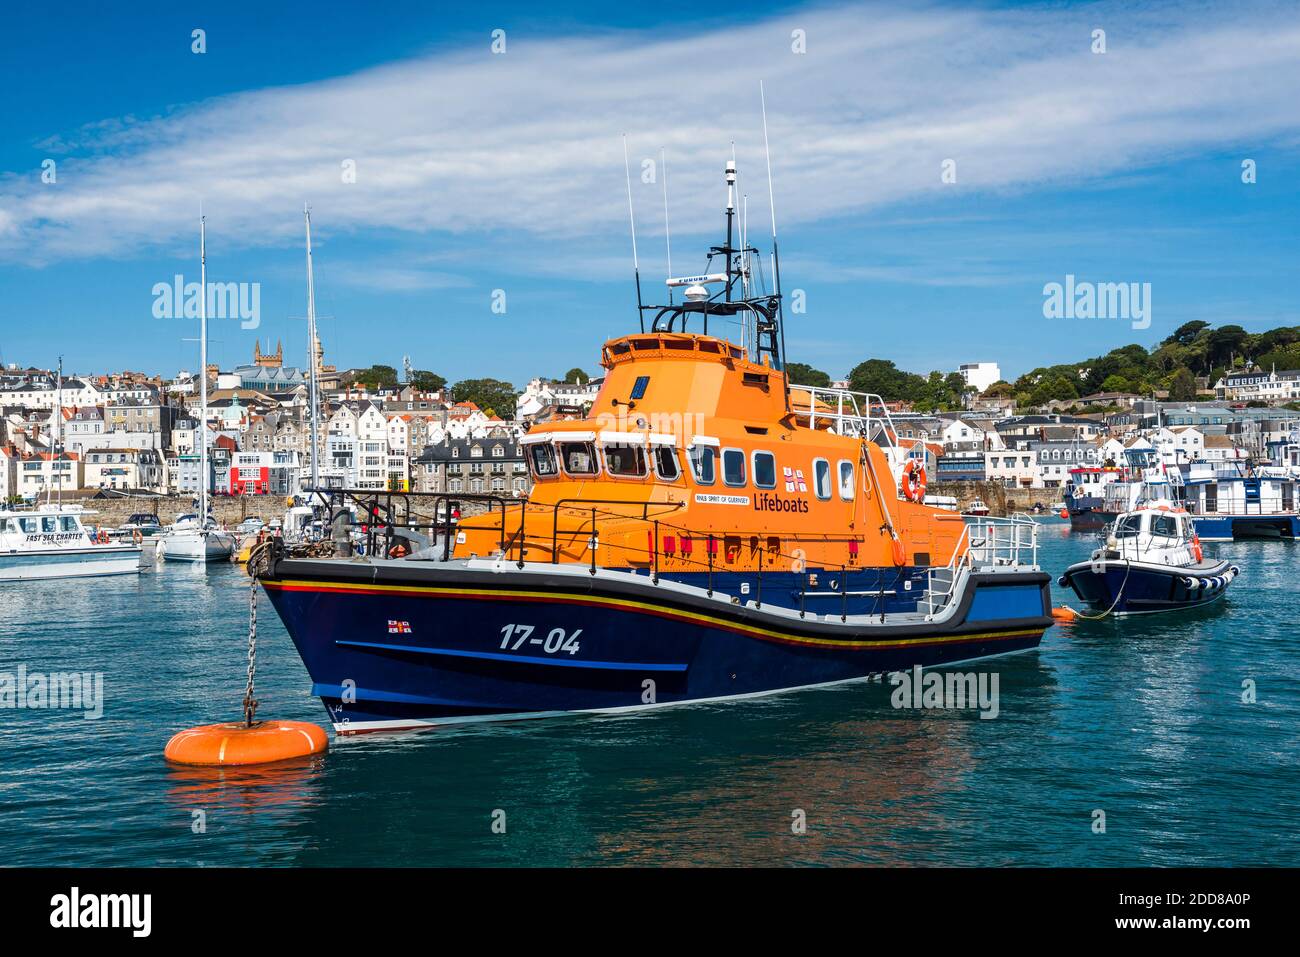 RNLI lifeguard boat in St Peter Port Harbour, Guernsey, Channel Islands, United Kingdom Stock Photo